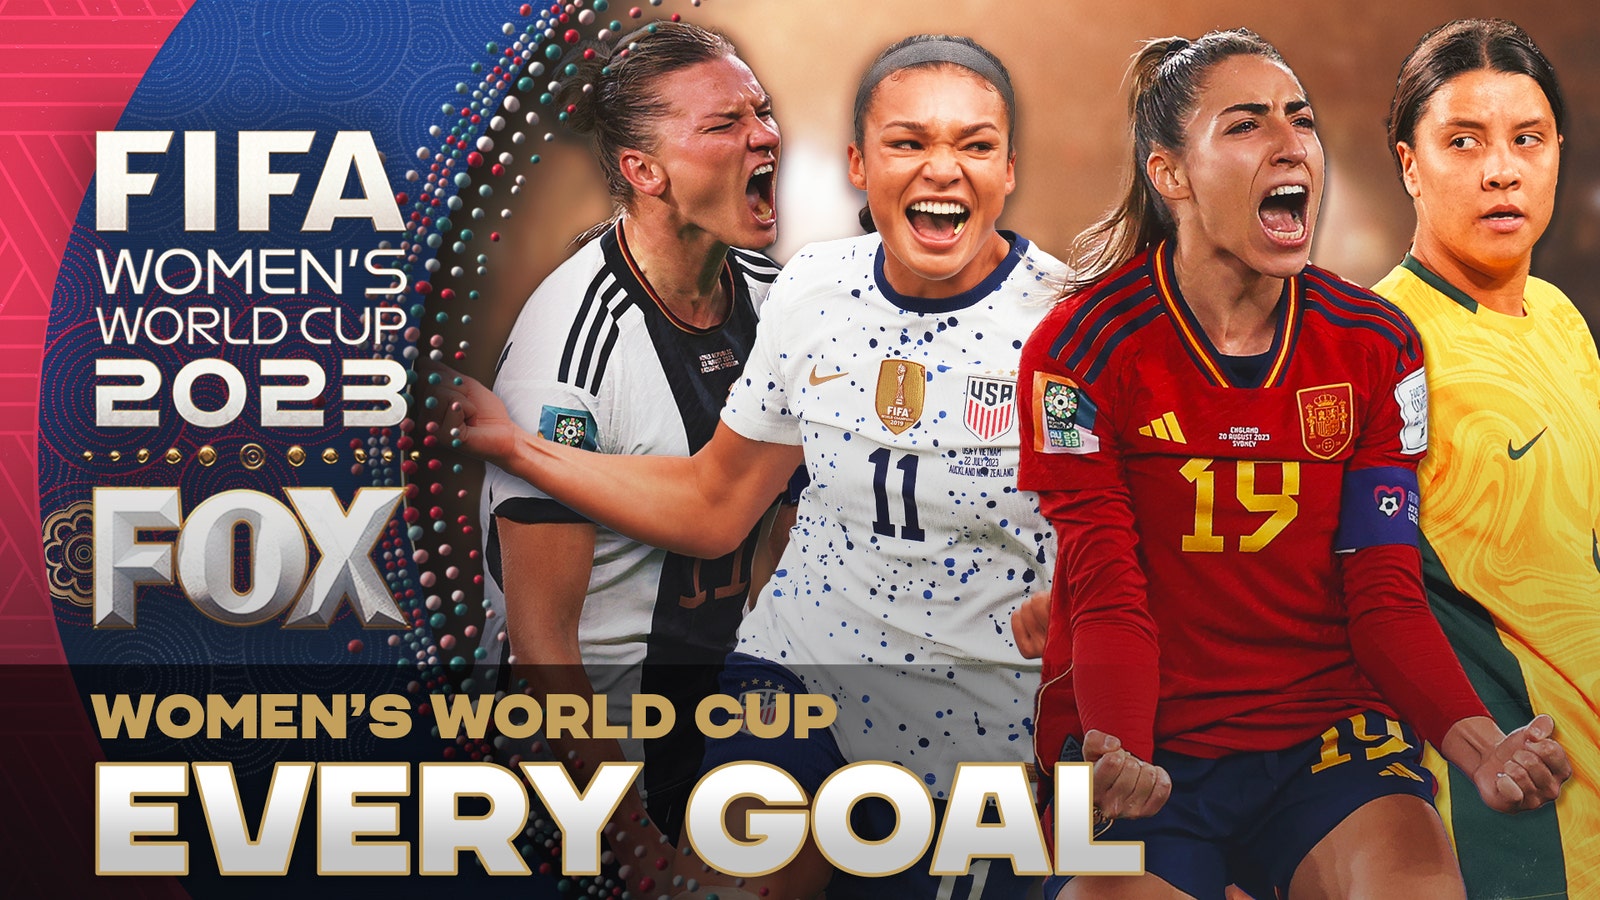 Every goal from the 2023 FIFA Women's World Cup